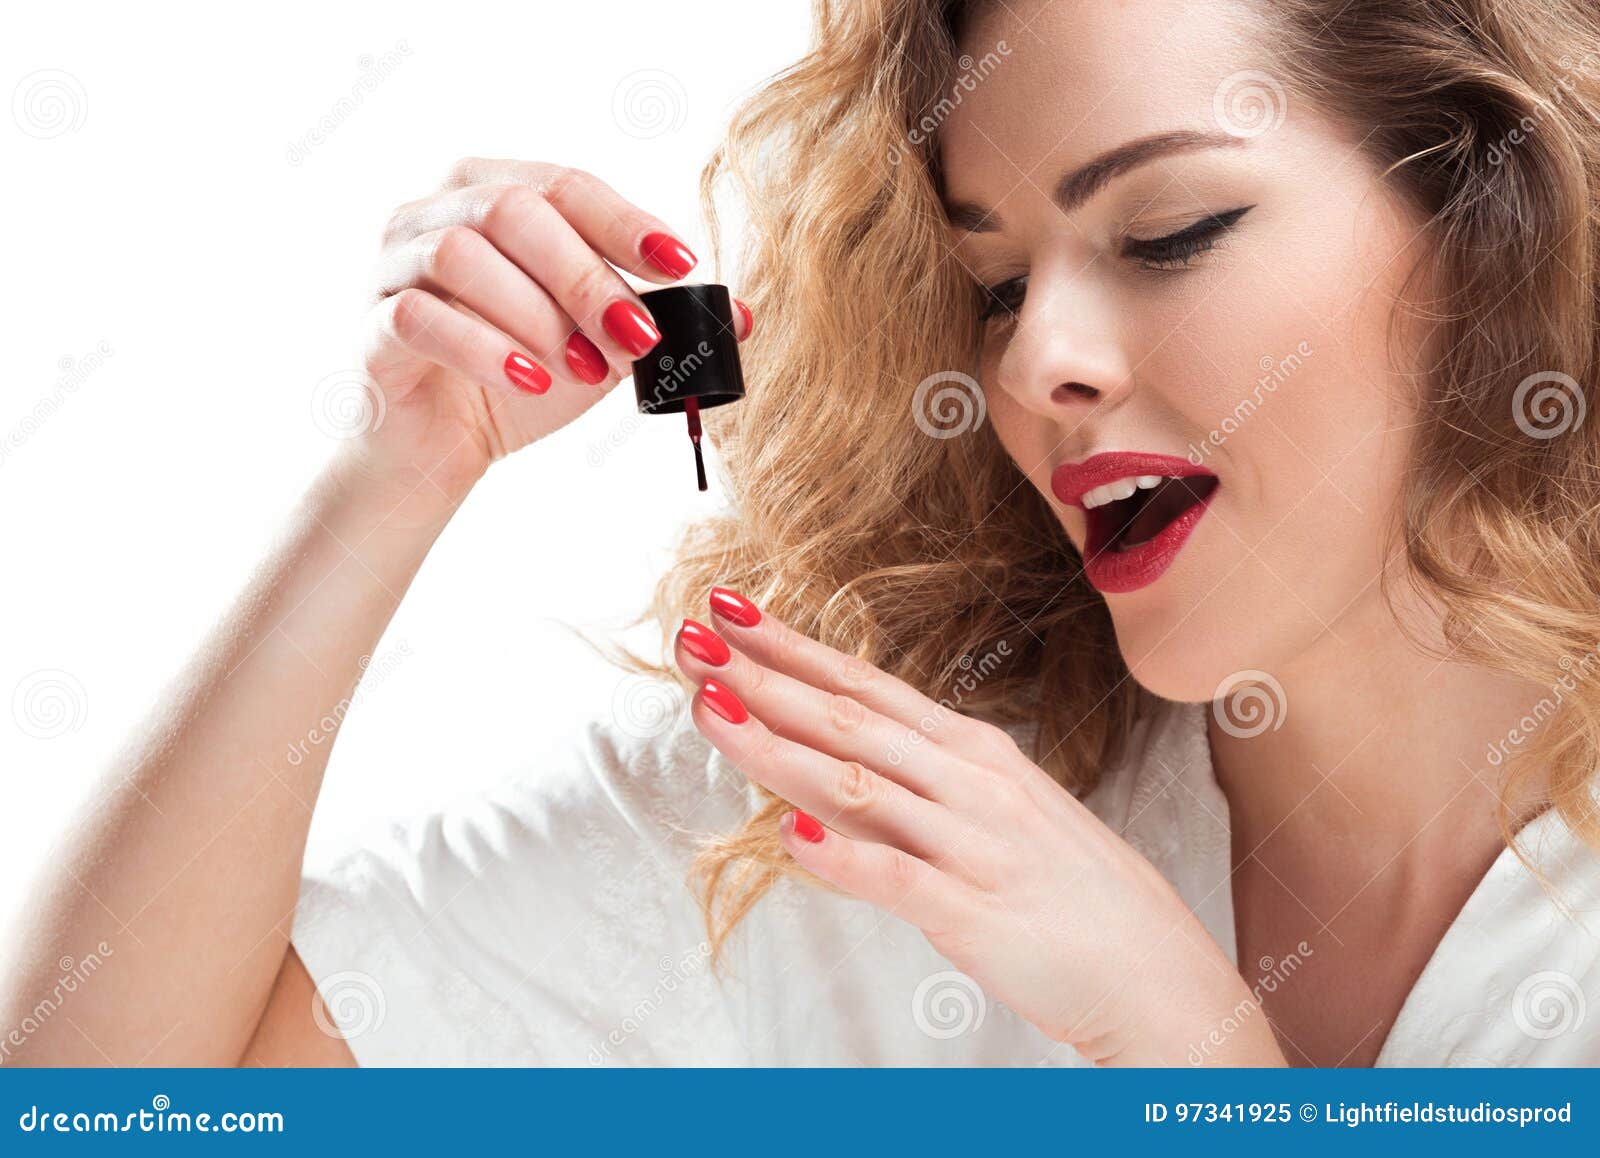 Portrait Of Excited Woman Applying Nail Polish Stock Image Image Of Fashion Alone 97341925